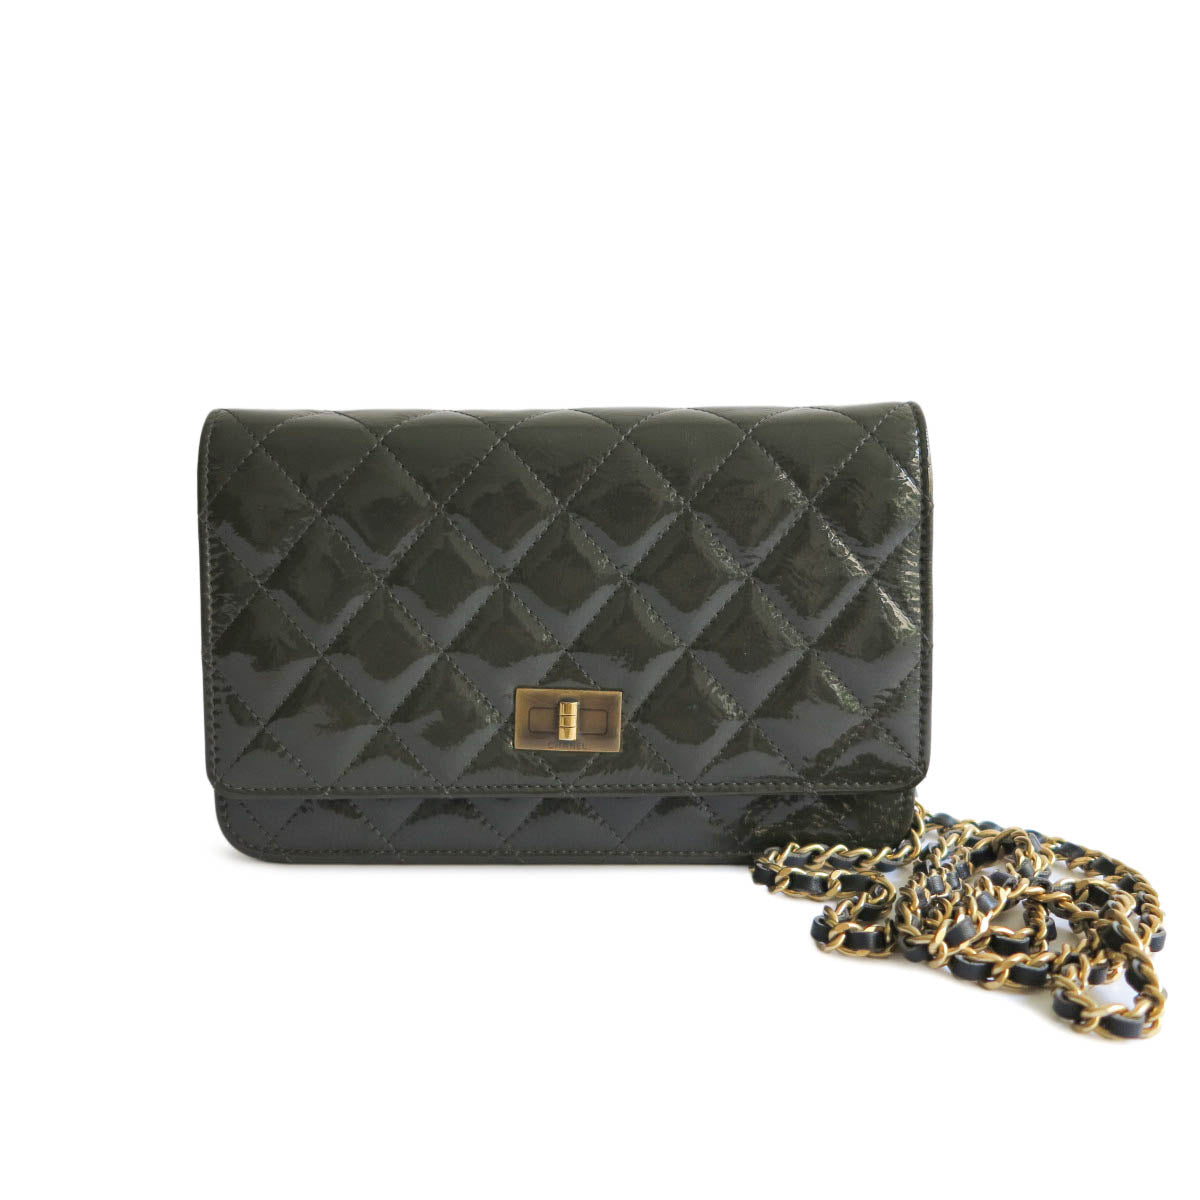 CHANEL 2.55 Wallet On Chain WOC in Dark Olive Grey Patent Leather